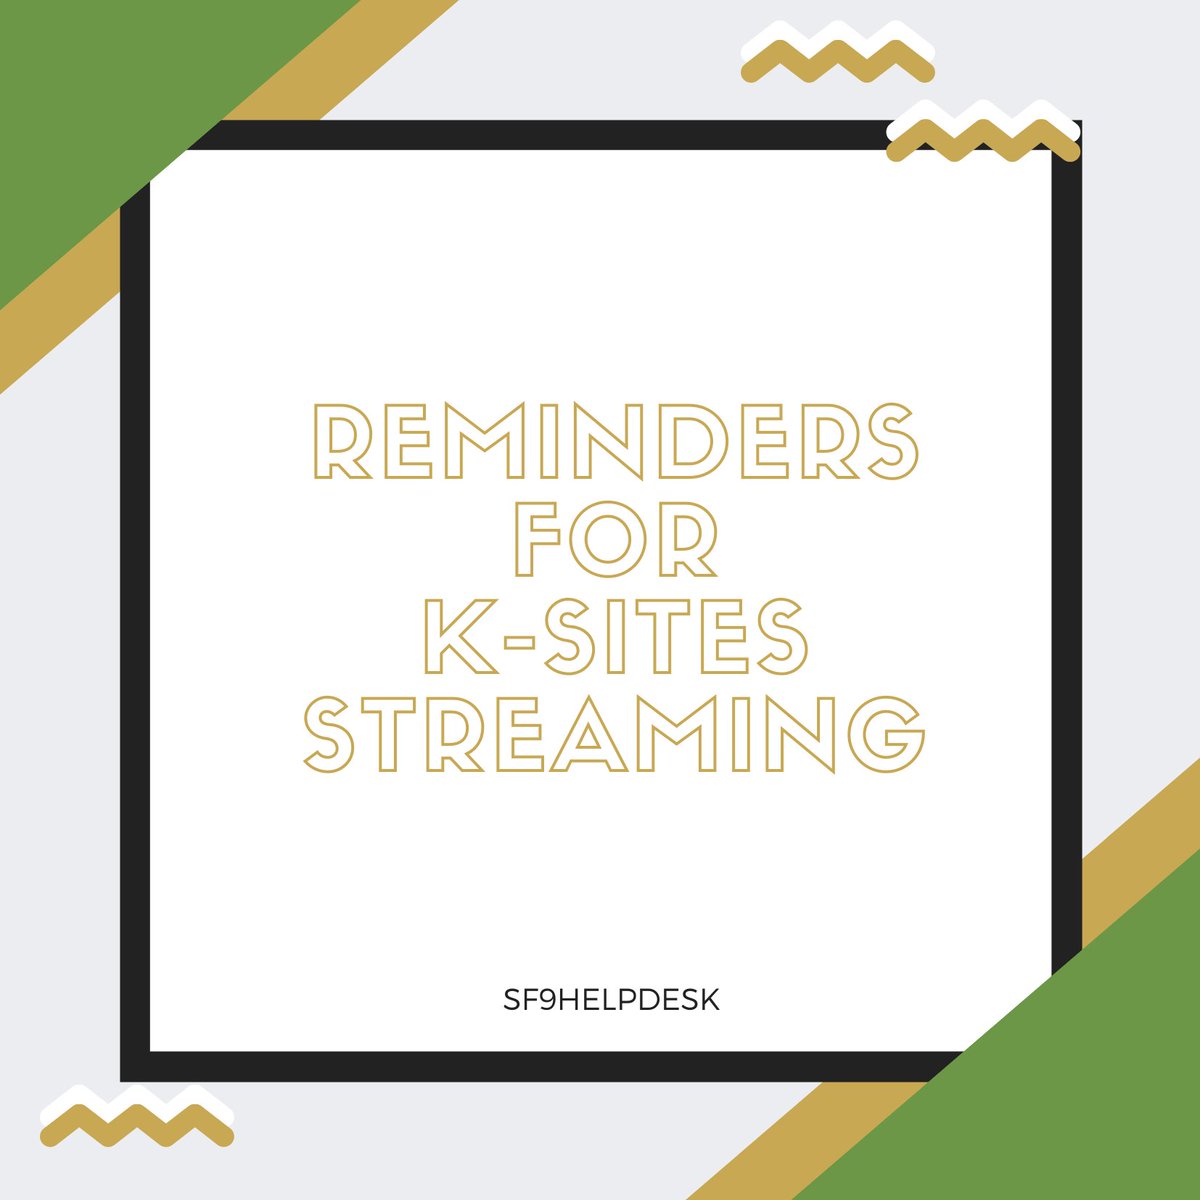 Here are some final reminders for K-Music Sites Streaming: THREAD Unli Pass Streamers, Limited Pass Streamers, Free Link Streamers Unli Pass StreamersPlease read carefully #SF9    #에스에프나인    #9loryUS    #여름향기가날춤추게해    #SummerBreeze    @SF9official